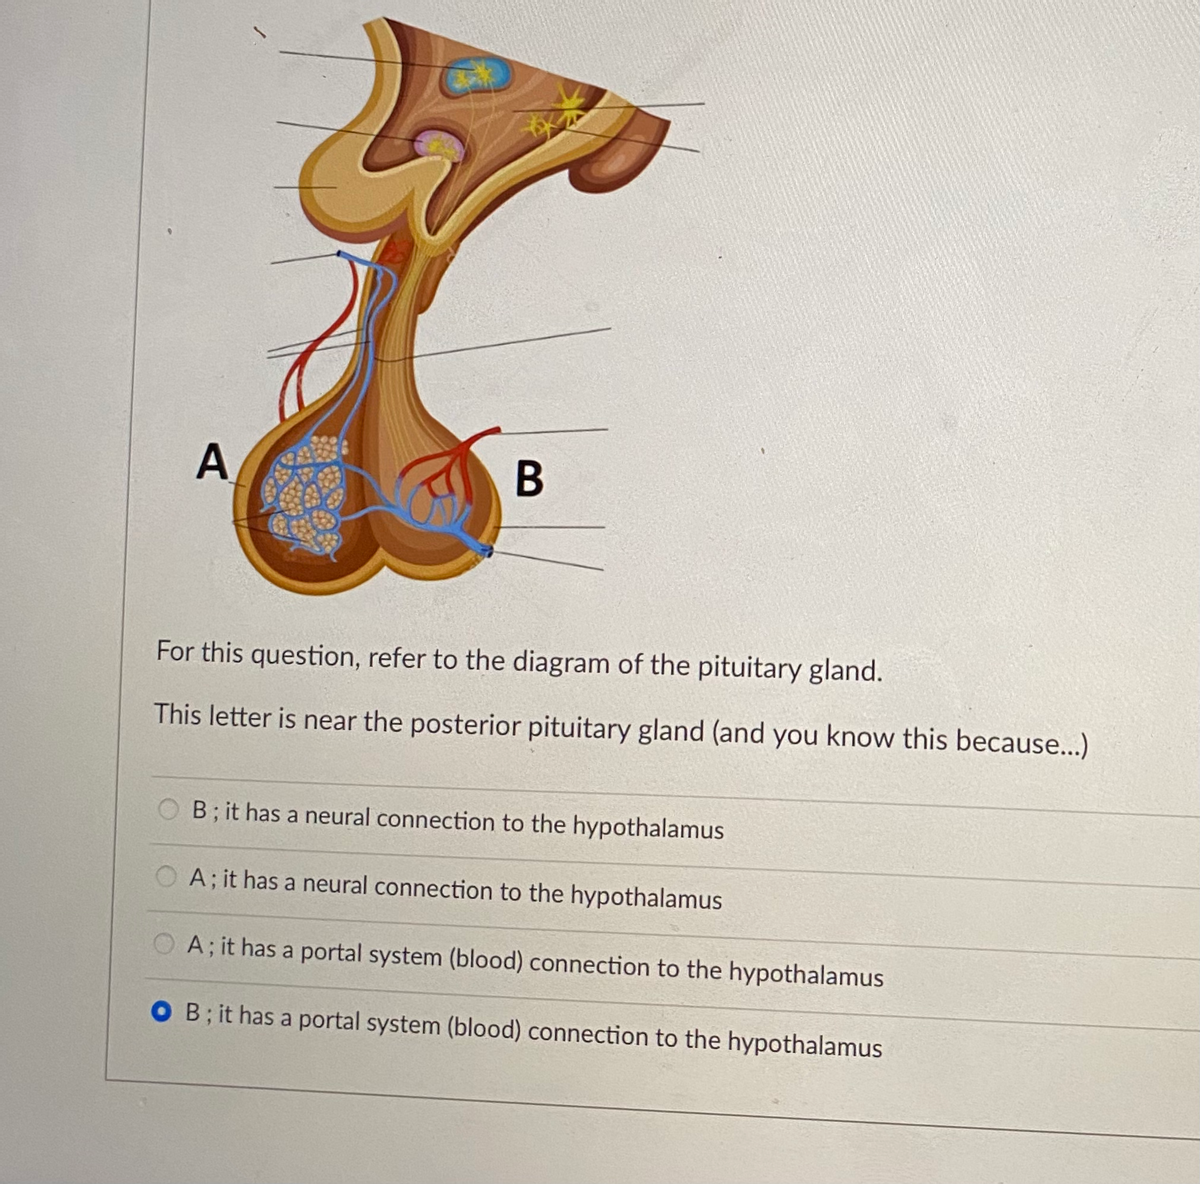 For this question, refer to the diagram of the pituitary gland.
This letter is near the posterior pituitary gland (and you know this because...)
OB; it has a neural connection to the hypothalamus
OA; it has a neural connection to the hypothalamus
OA; it has a portal system (blood) connection to the hypothalamus
O B; it has a portal system (blood) connection to the hypothalamus
A.
